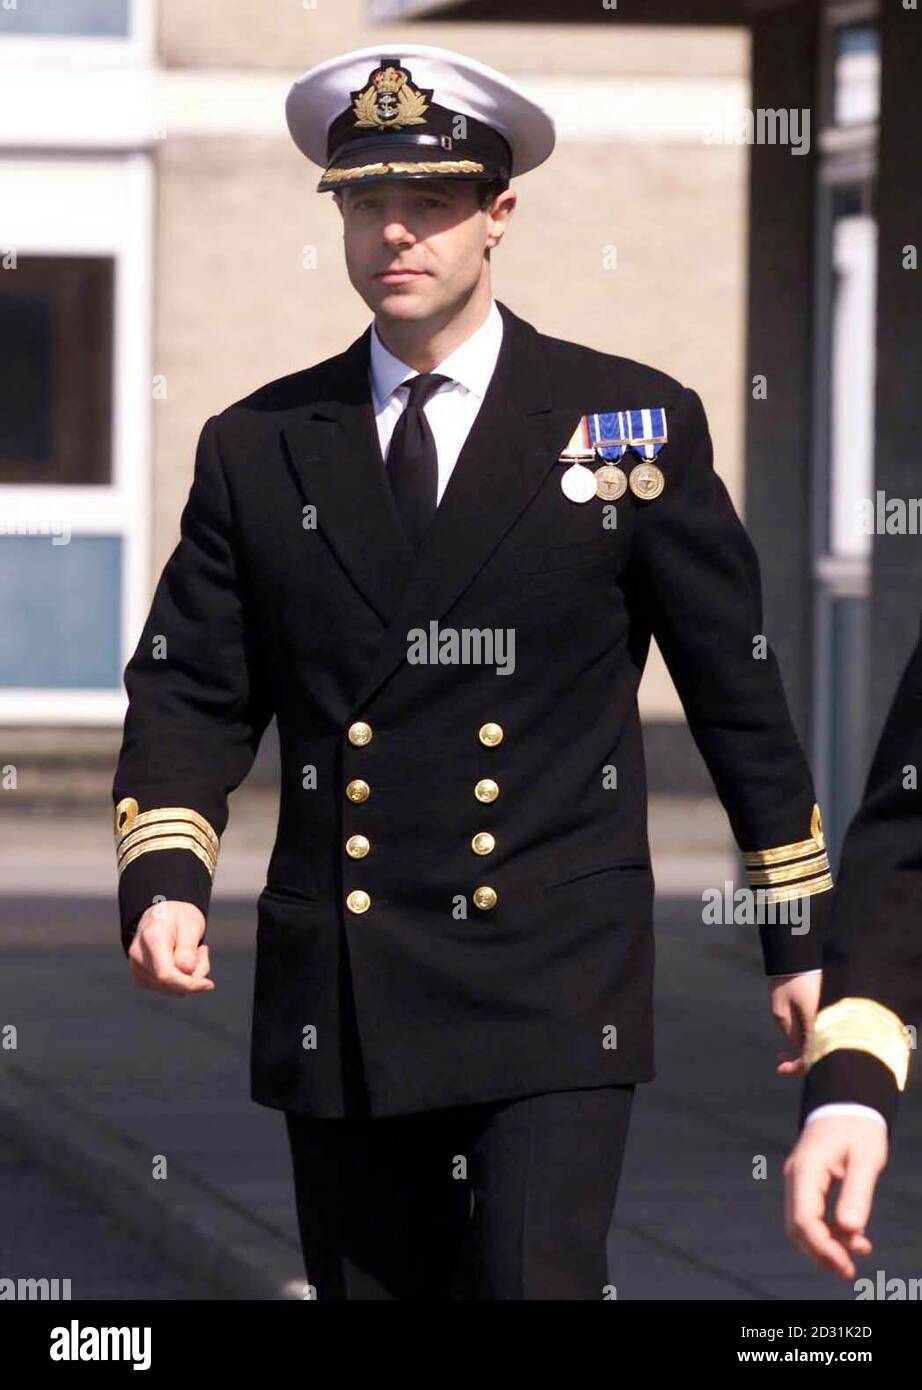 Commander Robert Sanguinetti of HMS Grafton at a court martial in Portsmouth, where he is appearing on charges with his navigator Lieutenant Desmond Donworth relating to the grounding of HMS Grafton near Oslo while taking part in a Nato operation. * against Serbia. Stock Photo